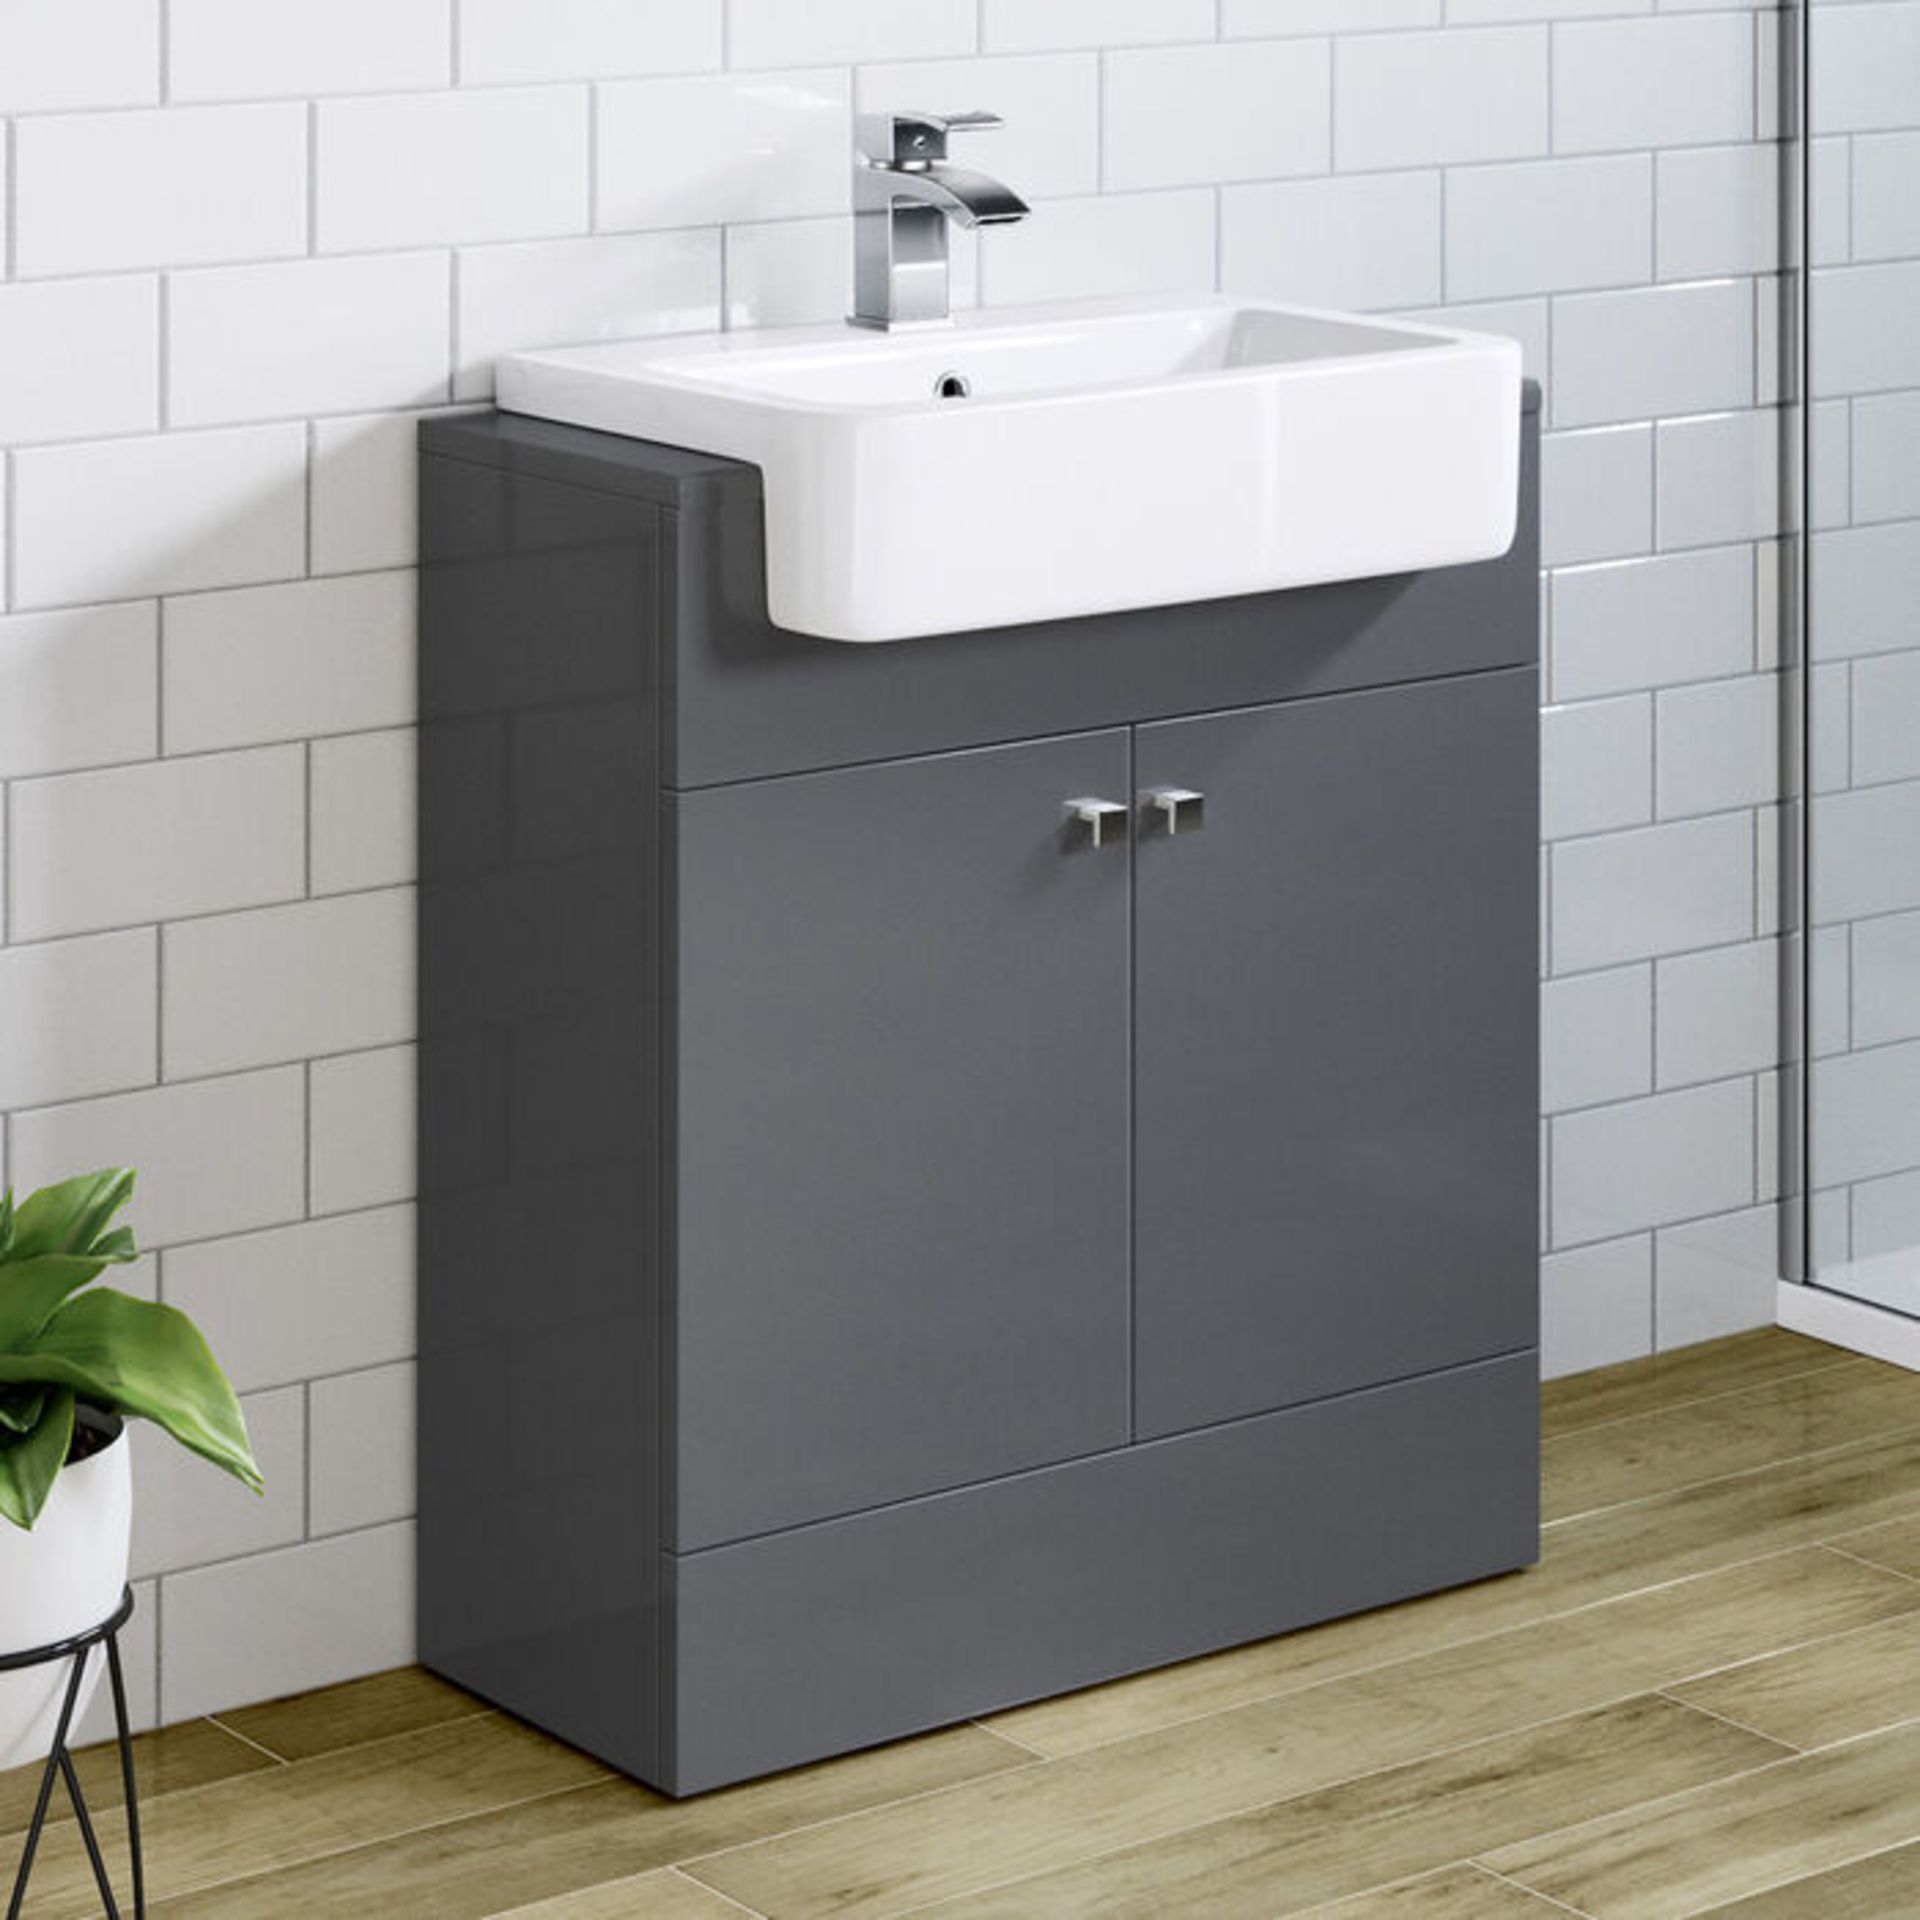 (H73) 660mm Harper Gloss Grey Sink Vanity Unit - Floor Standing. Basin not included. Expertly ...